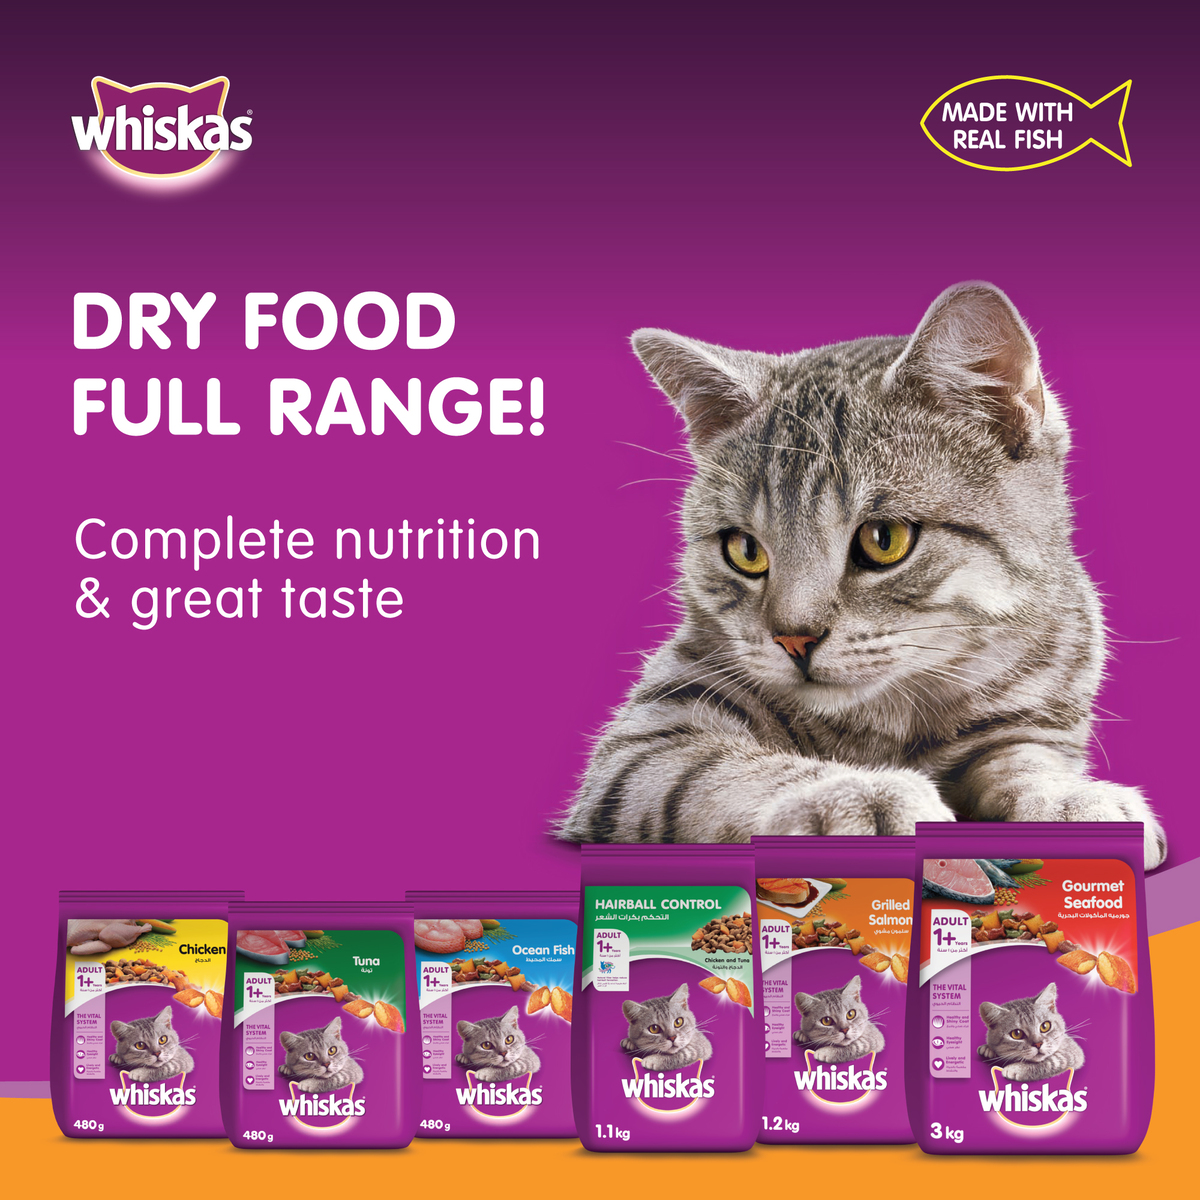 Whiskas Grilled Salmon Dry Food for Adult Cats 1+ Years 1.2kg